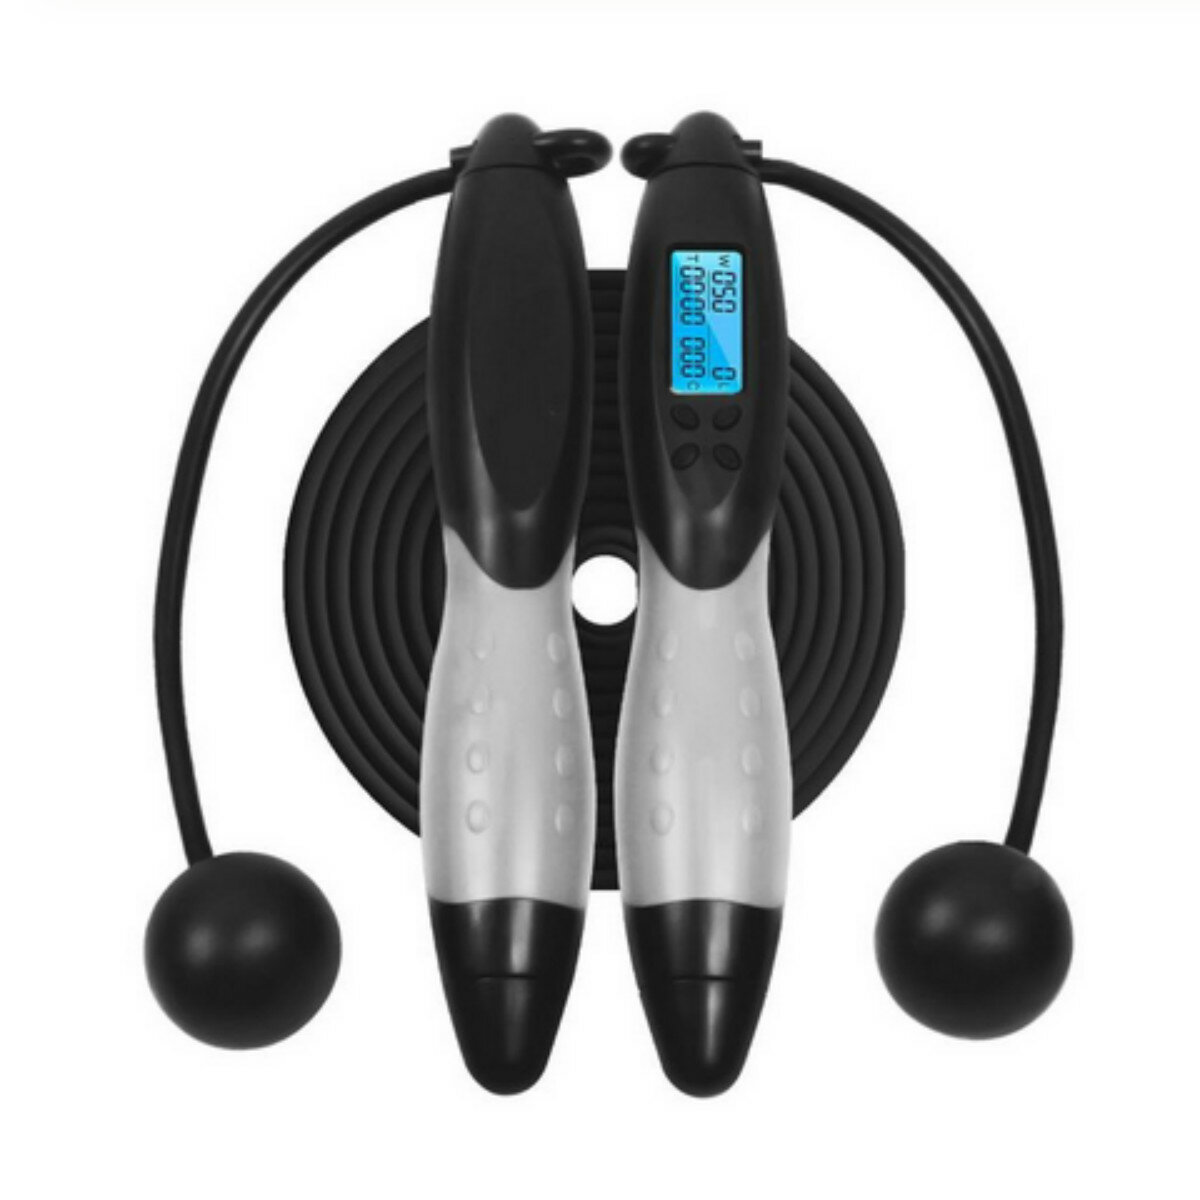 Intelligent-Electronic-Counting-Rope-Jumping-Skipping-Adult-Indoor-Fitness-Exercise-Equipment-1670480-1